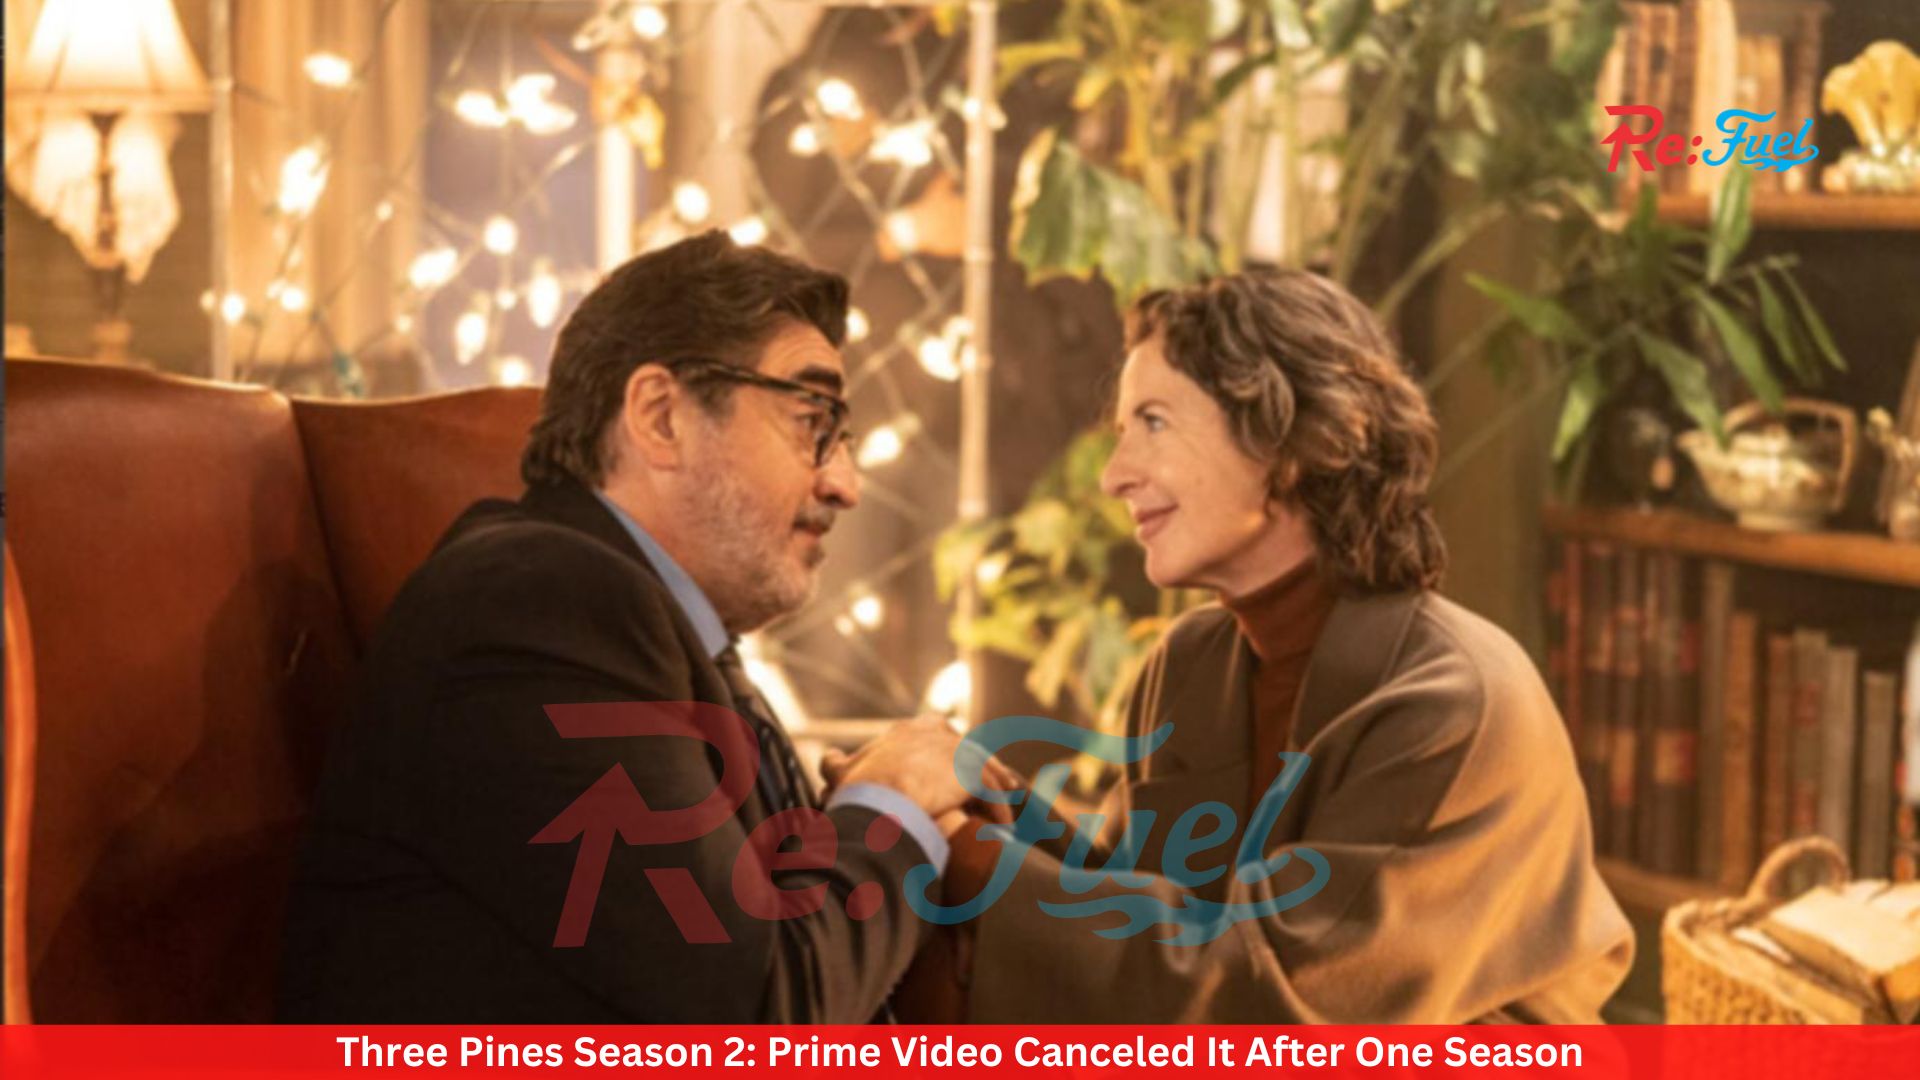 Three Pines Season 2: Prime Video Canceled It After One Season